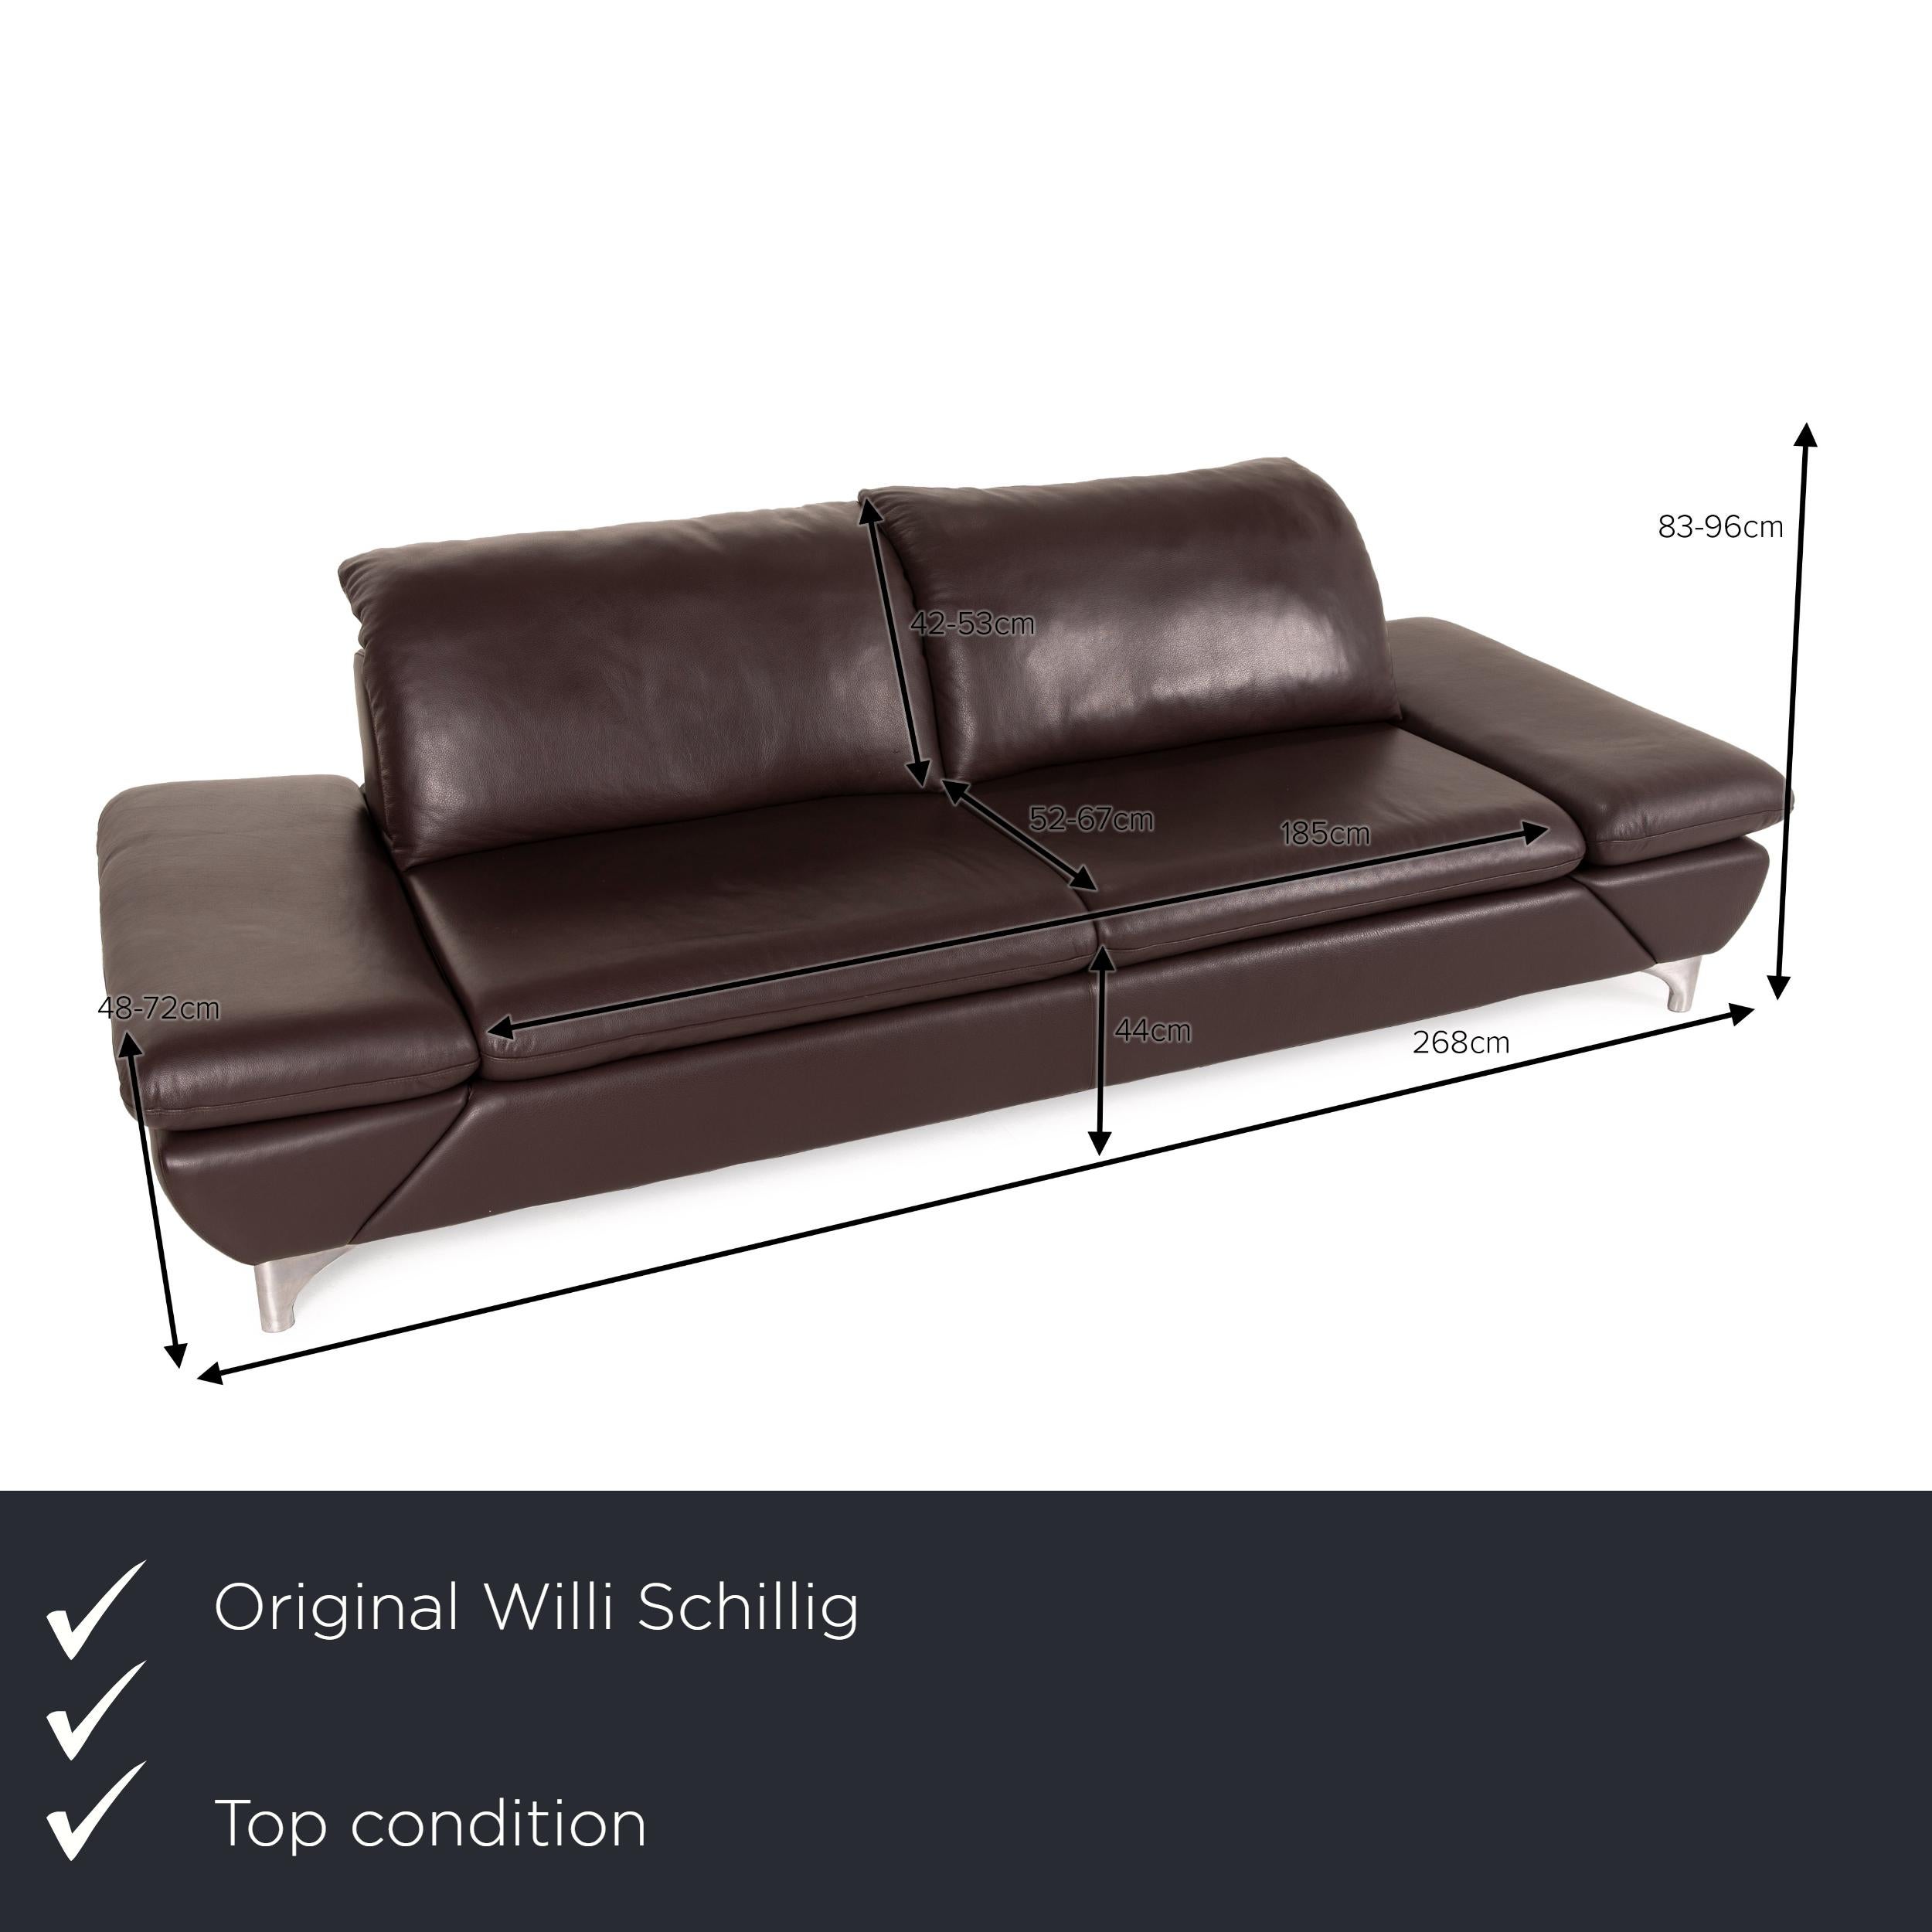 We present to you a Willi Schillig Taoo leather sofa brown three-seater sofa function couch dark.
 

 Product measurements in centimeters:
 

Depth: 105
Width: 268
Height: 83
Seat height: 44
Rest height: 48
Seat depth: 52
Seat width: